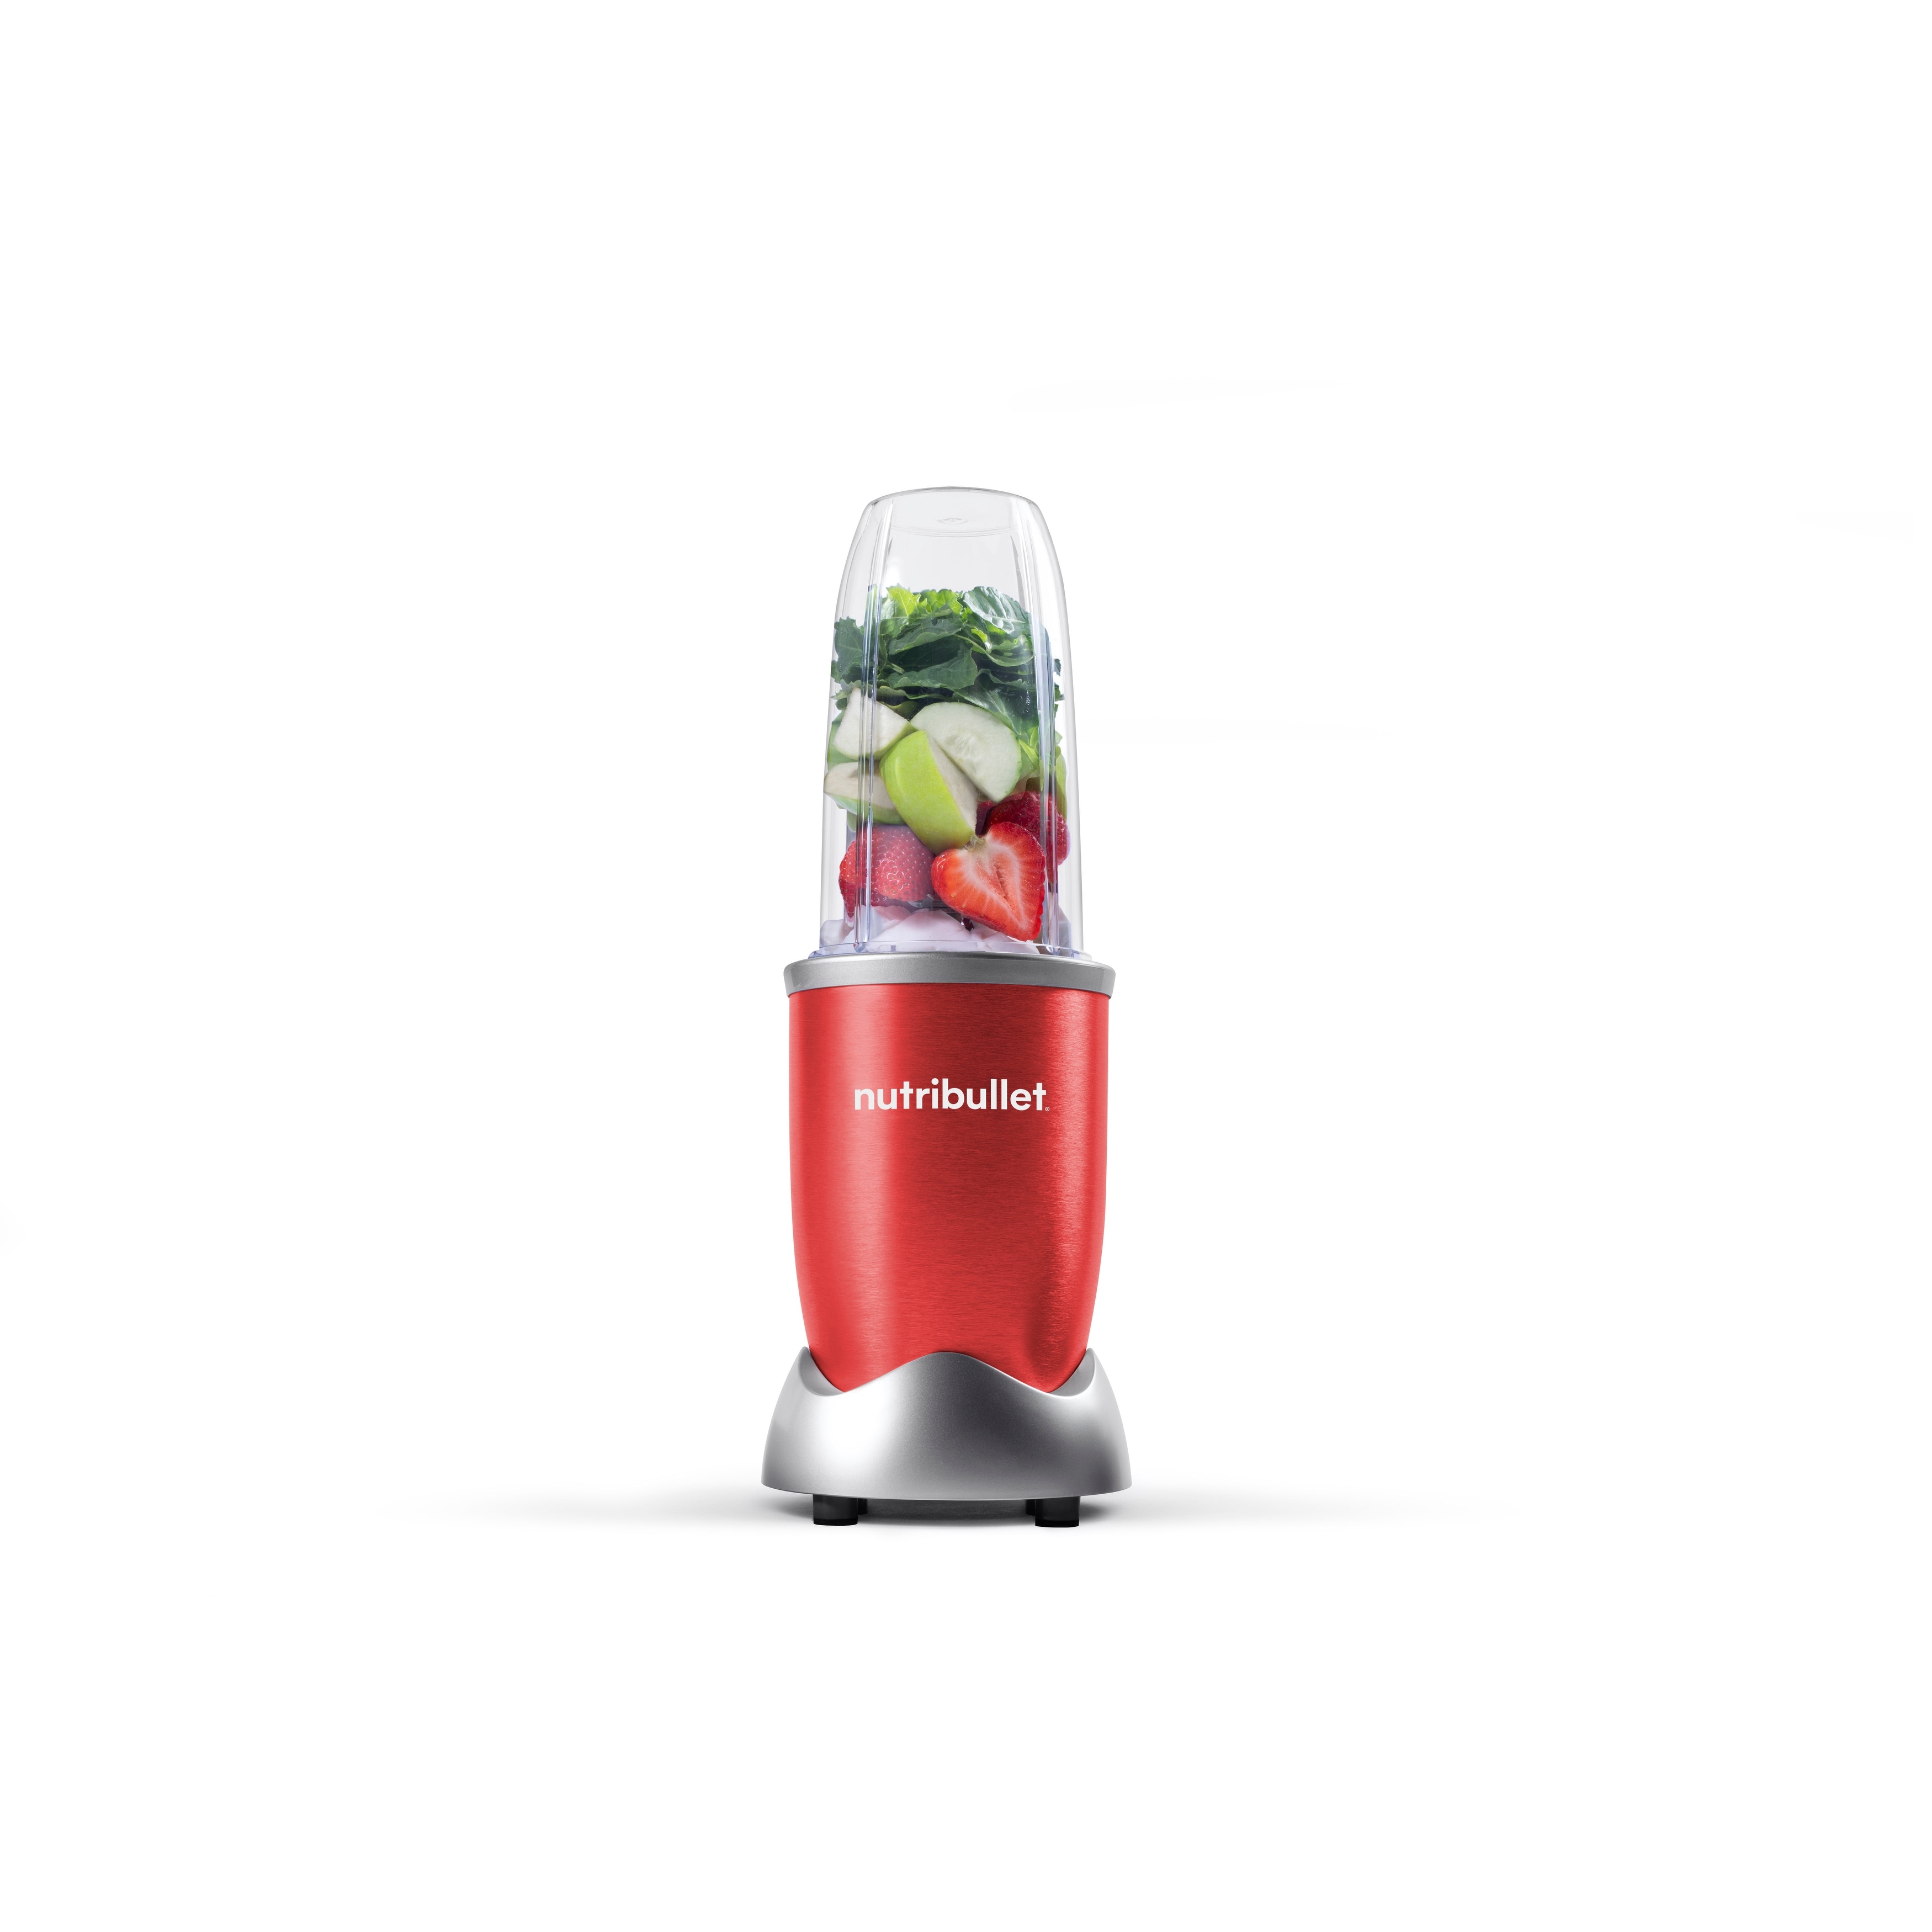 https://ak1.ostkcdn.com/images/products/is/images/direct/8283f2553fda9481d93920c555aaa2f6e62979be/Magic-Bullet-NB9-0901-Nutribullet-Pro.jpg